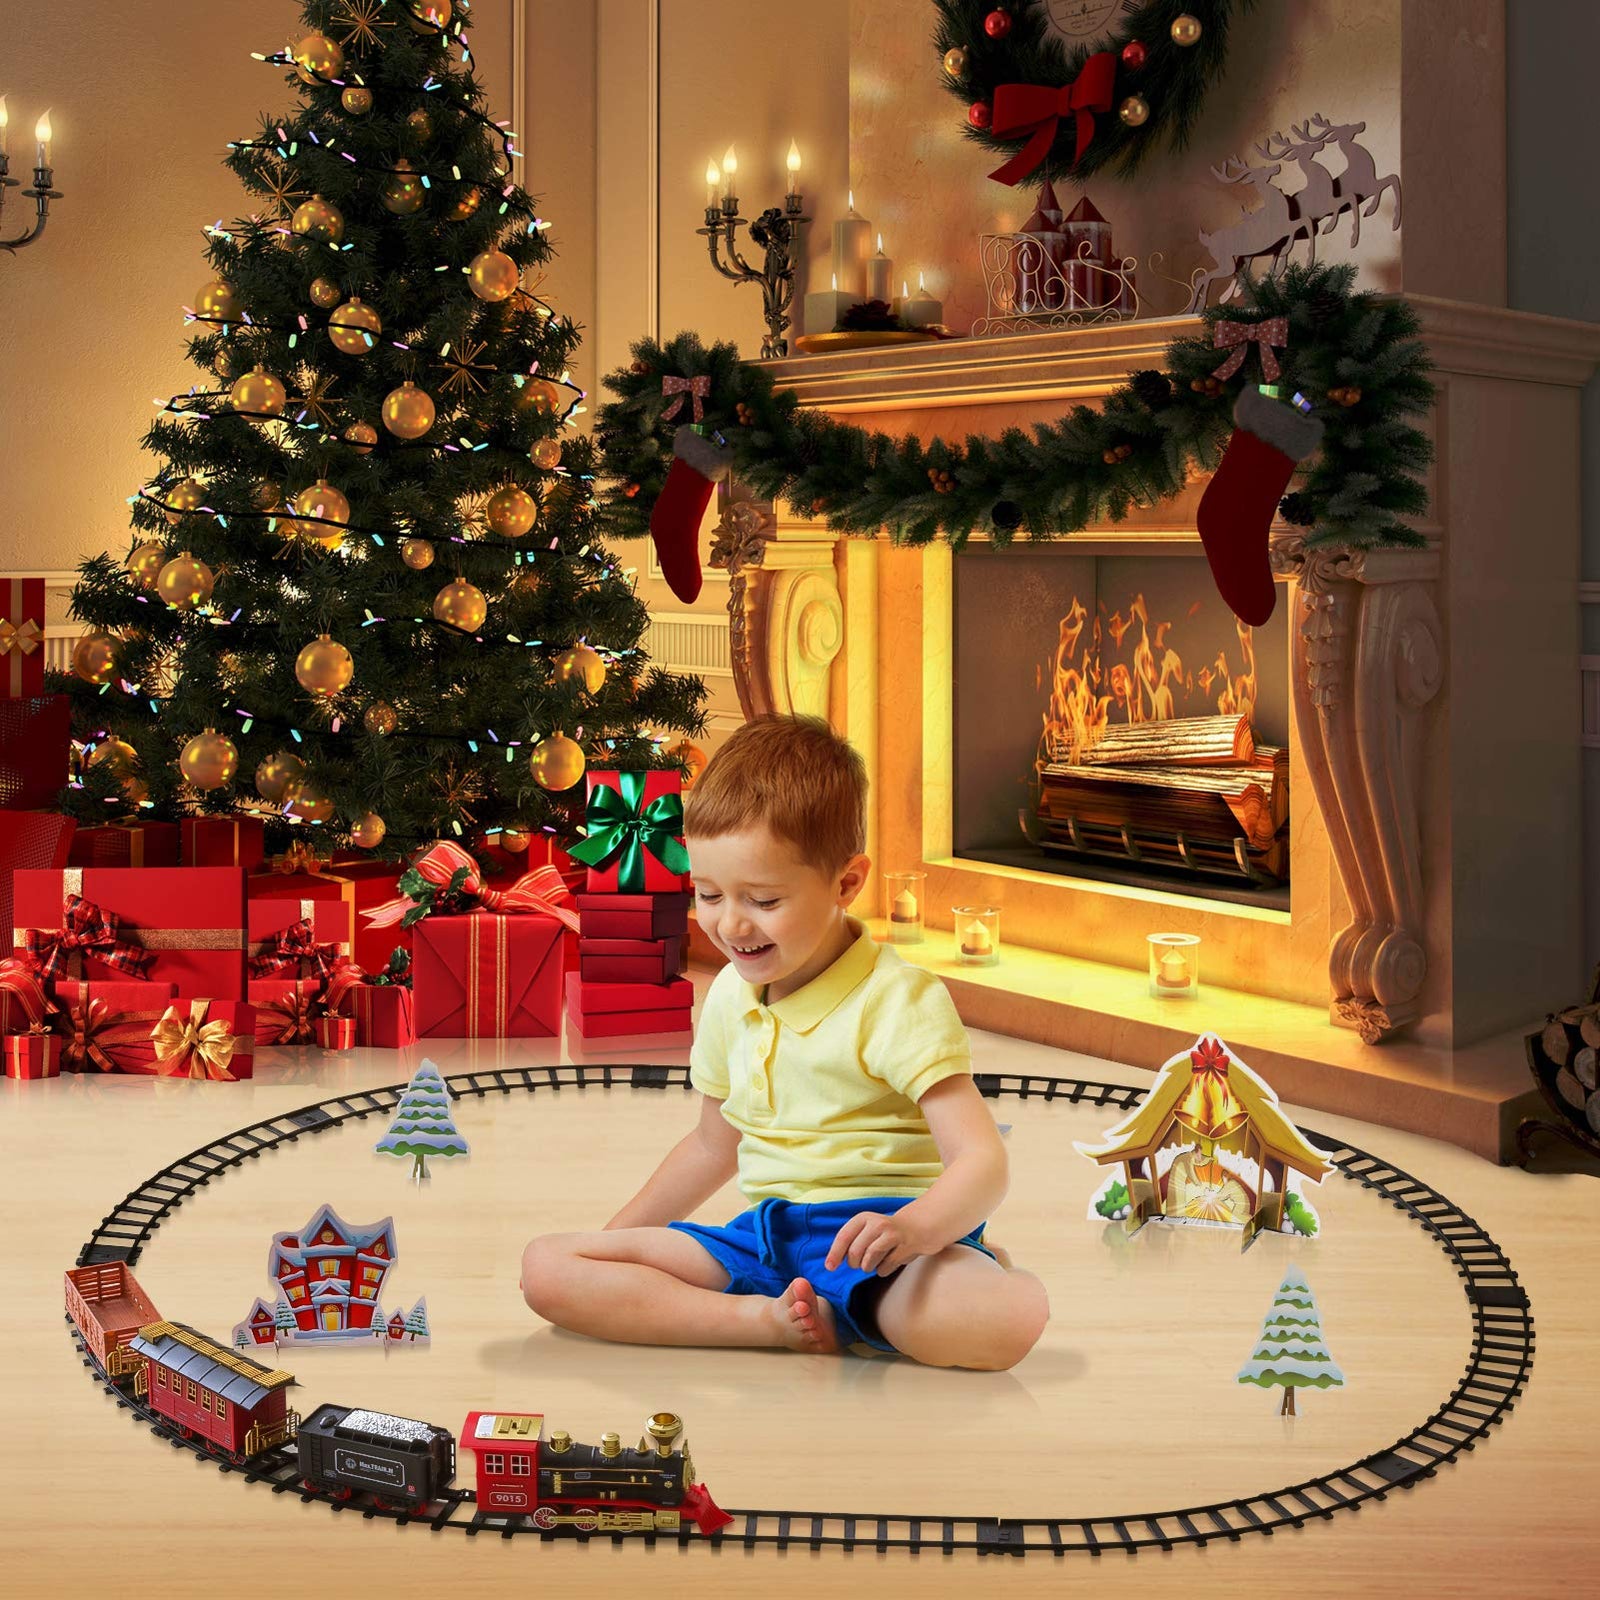 Hot Bee Train Set - Electric Train Toy for Boys Girls w/ Smokes, Lights & Sound, Railway Kits w/ Steam Locomotive Engine, Cargo Cars & Tracks, Christmas Gifts for 3 4 5 6 7 8+ year old Kids